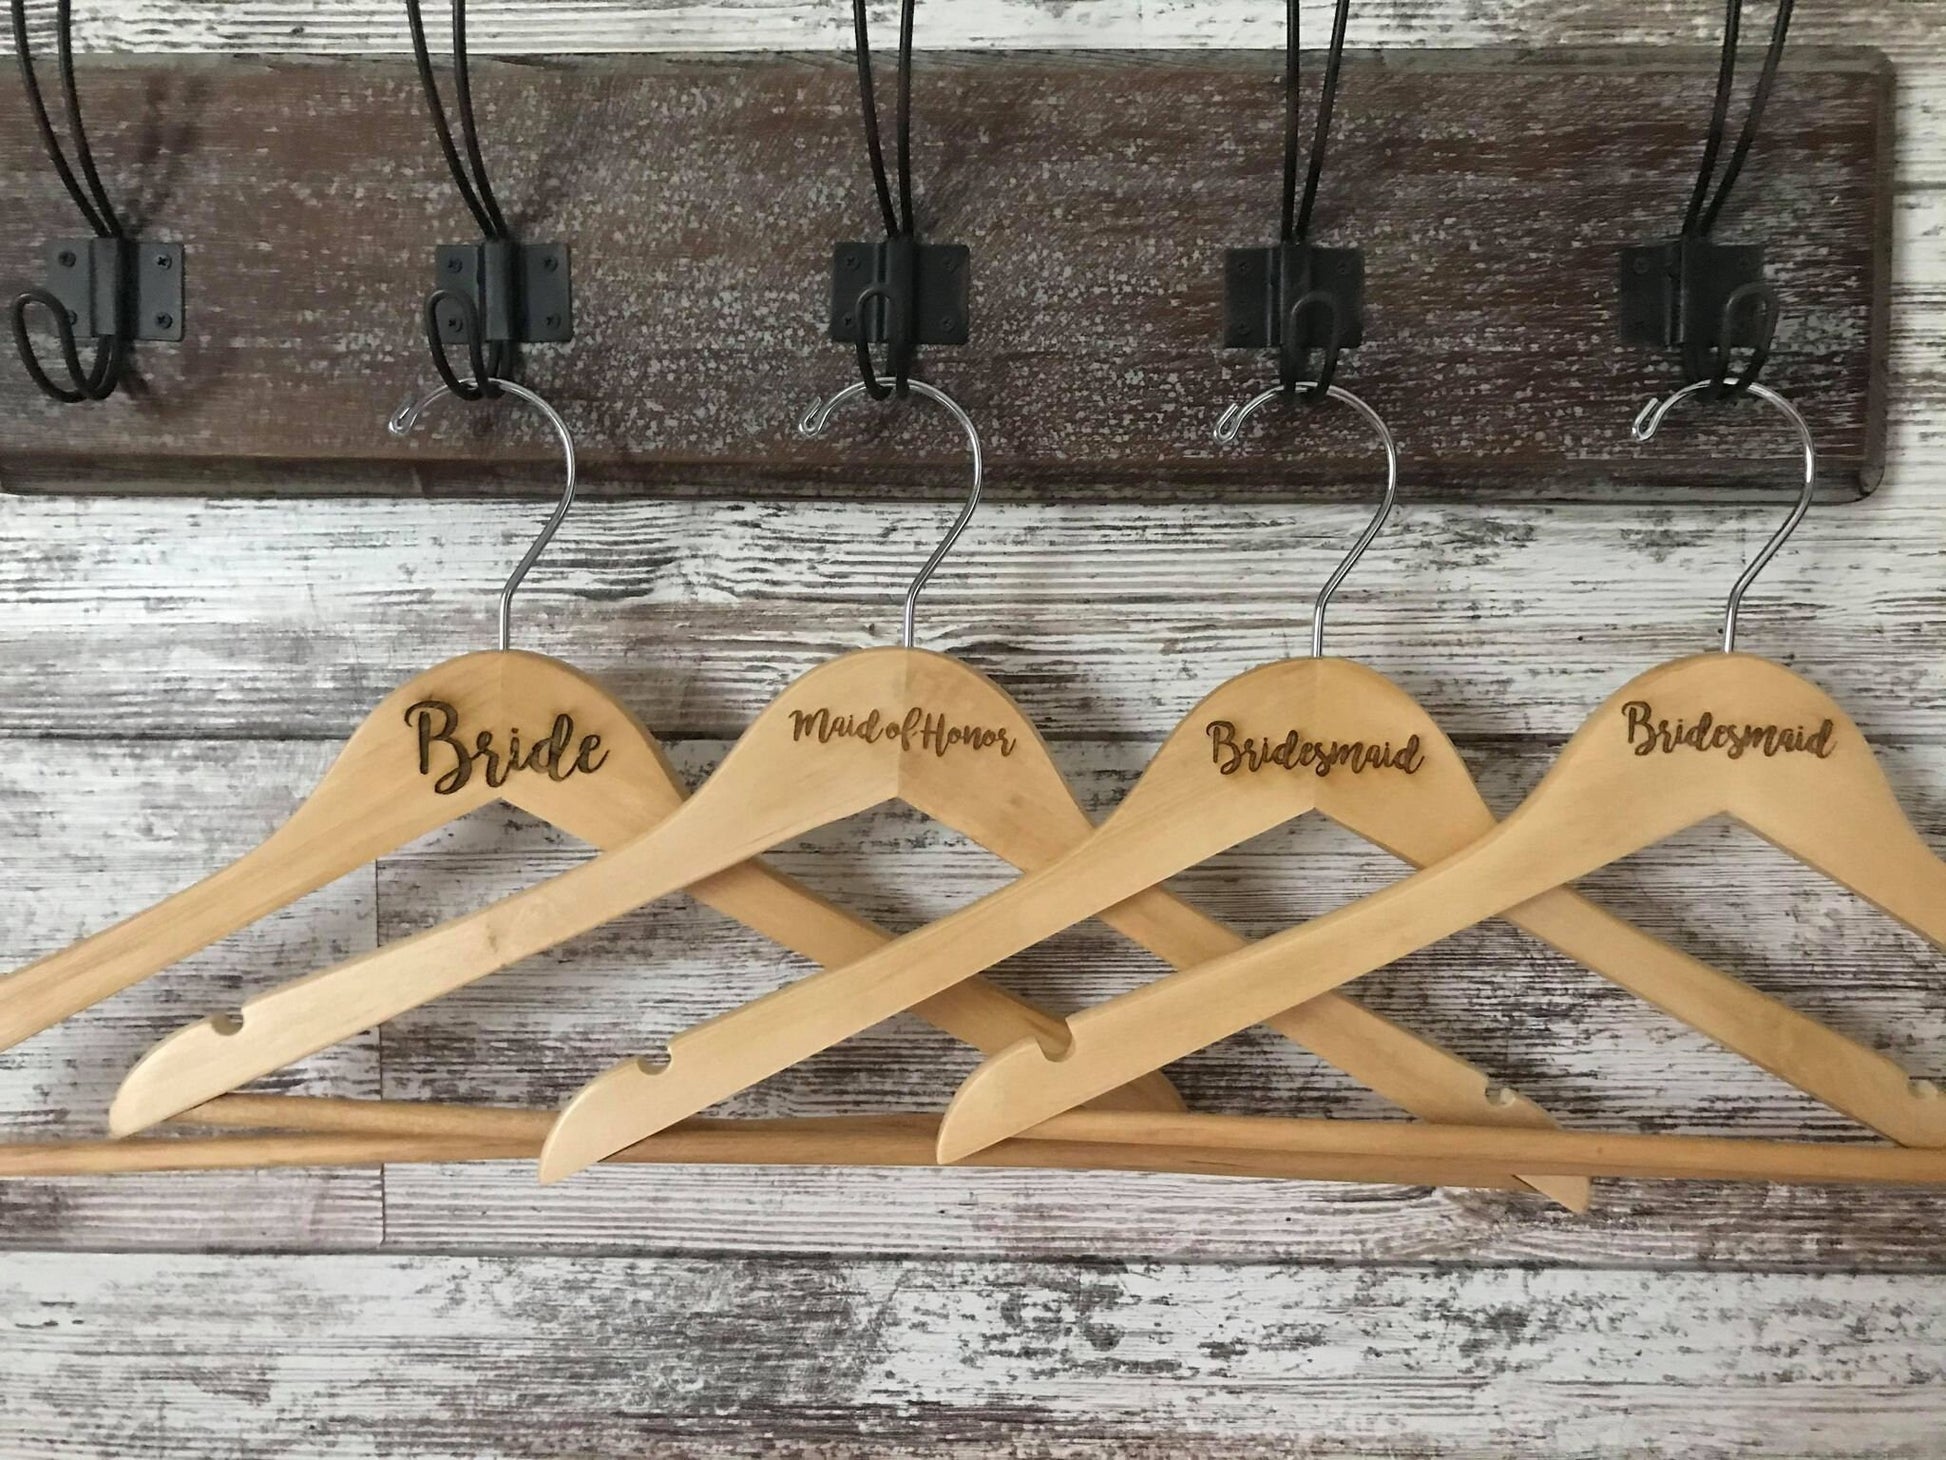 Bridesmaid Bridal Party Engraved Hard Wood Hanger Clothes Coat Sturdy Gift Wedding Bromellow Personalized